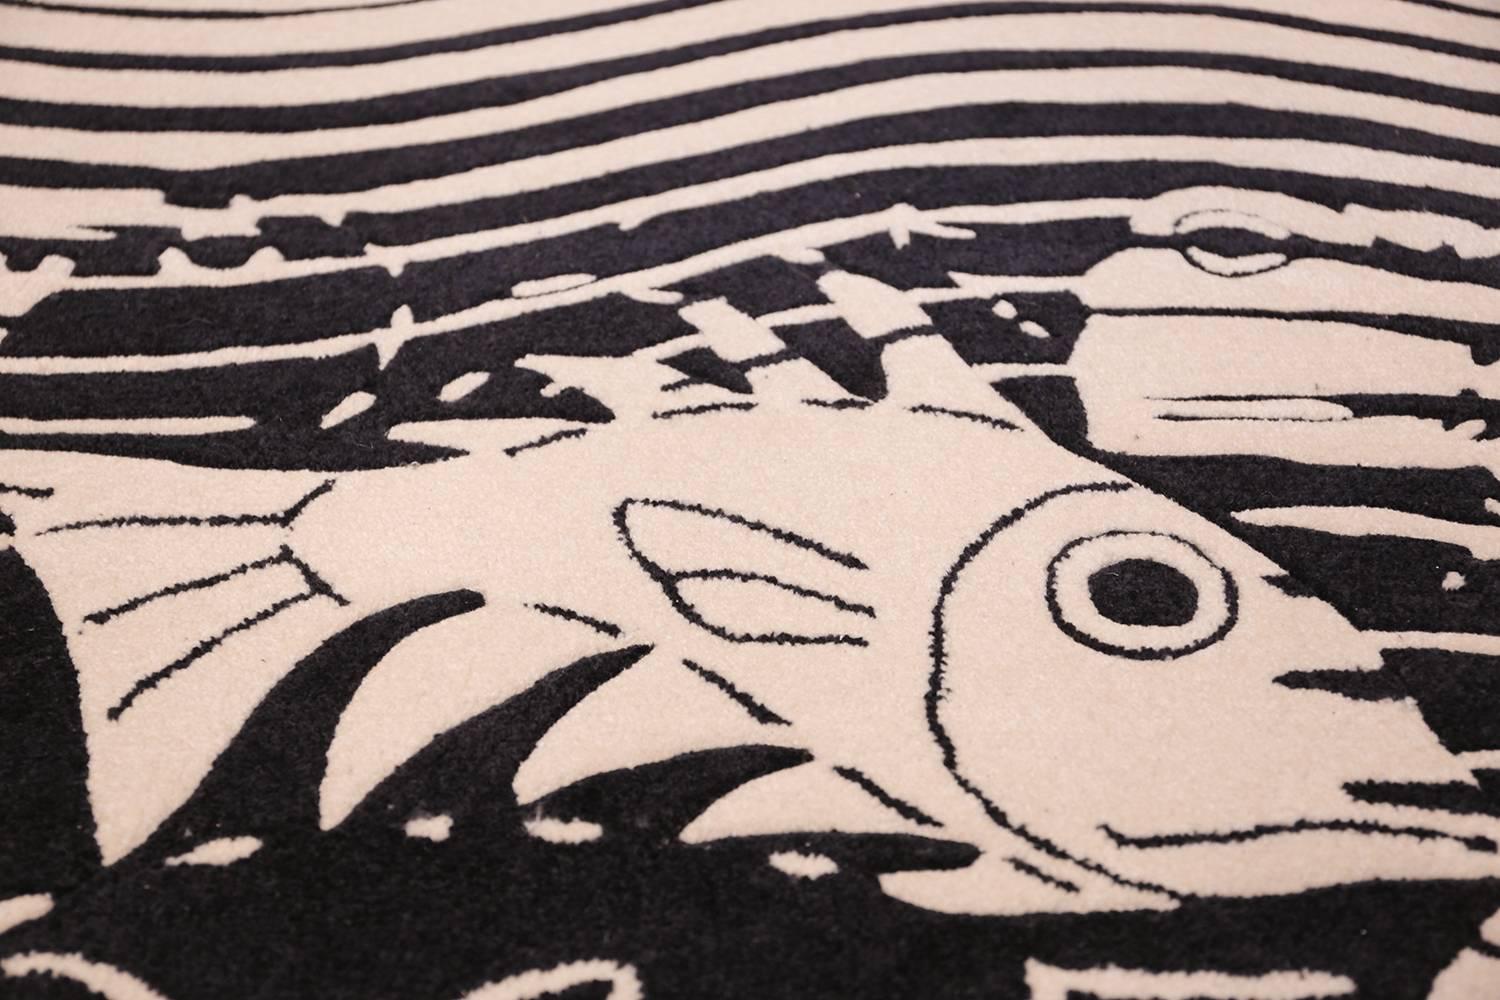 Breathtaking Vintage Scandinavian Black and White Maurits Escher Art Rug, Country of Origin / Rug Type: Scandinavia Rug, Circa Date: Mid – 20th Century. Size: 5 ft 7 in x 8 ft (1.7 m x 2.44 m)

Escher often introduced surrealism into his work, as in